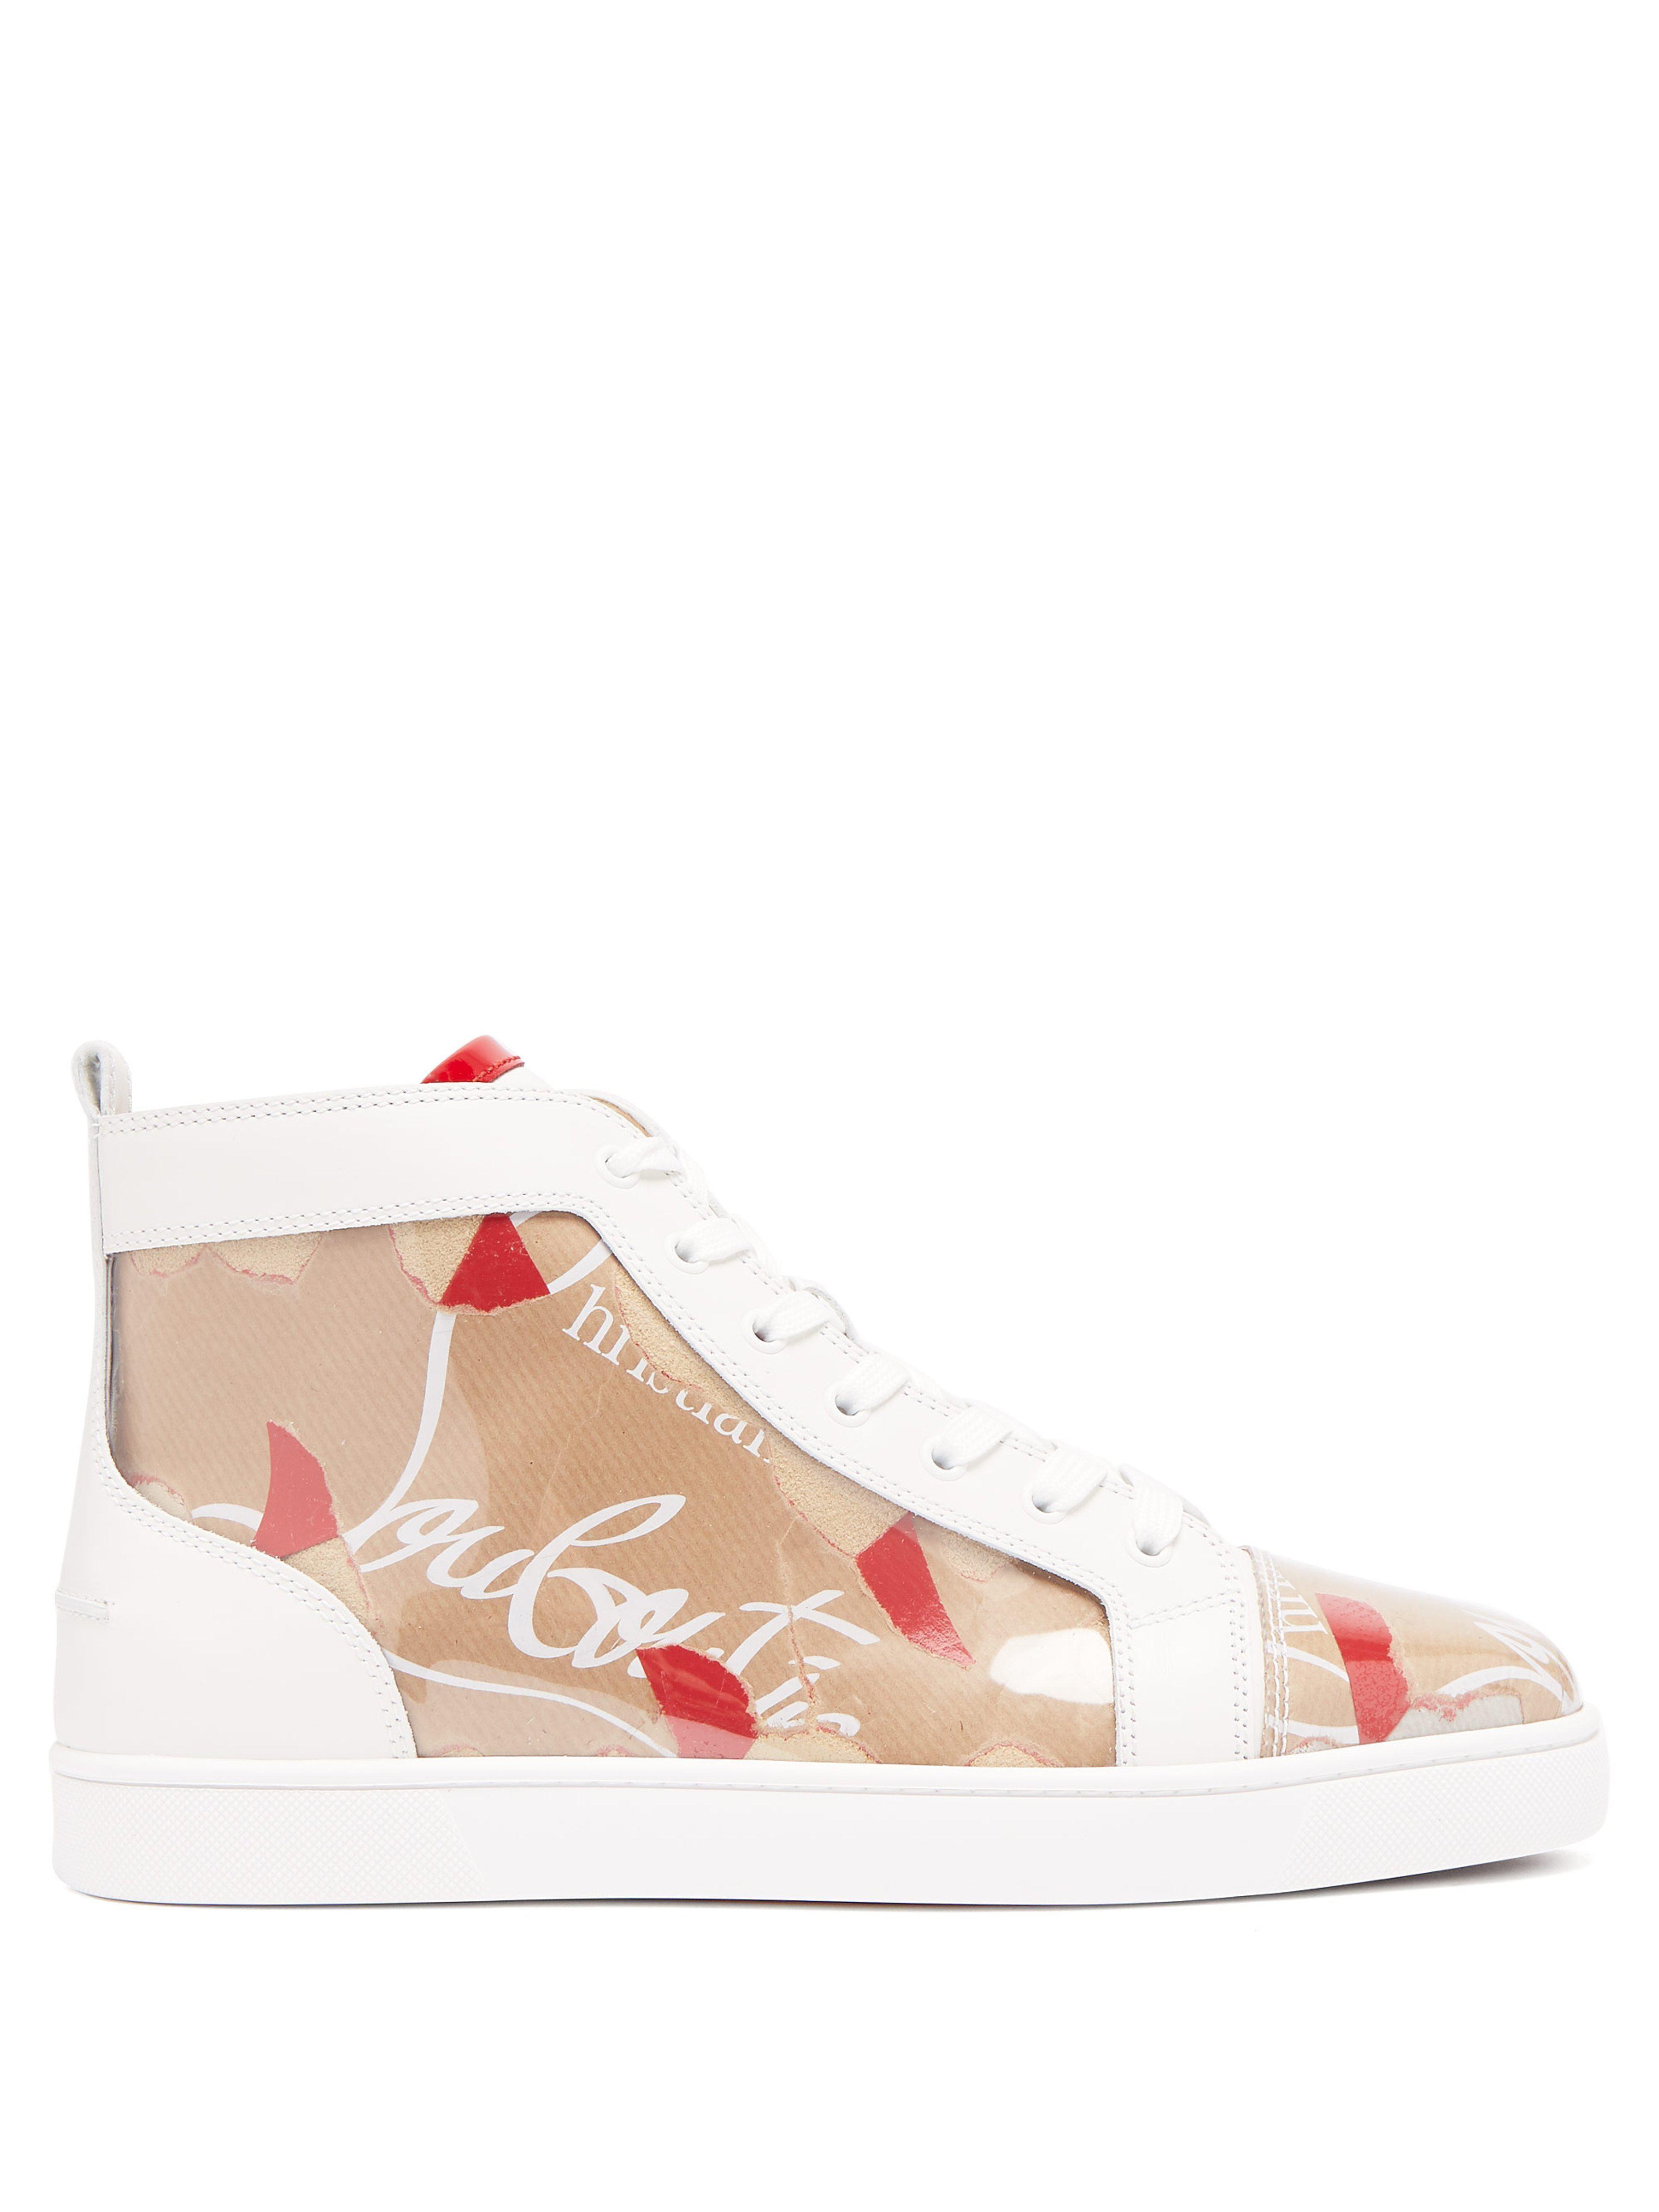 Christian Louboutin Logo - Christian Louboutin Louis Kraft Logo High Top Trainers for Men - Lyst